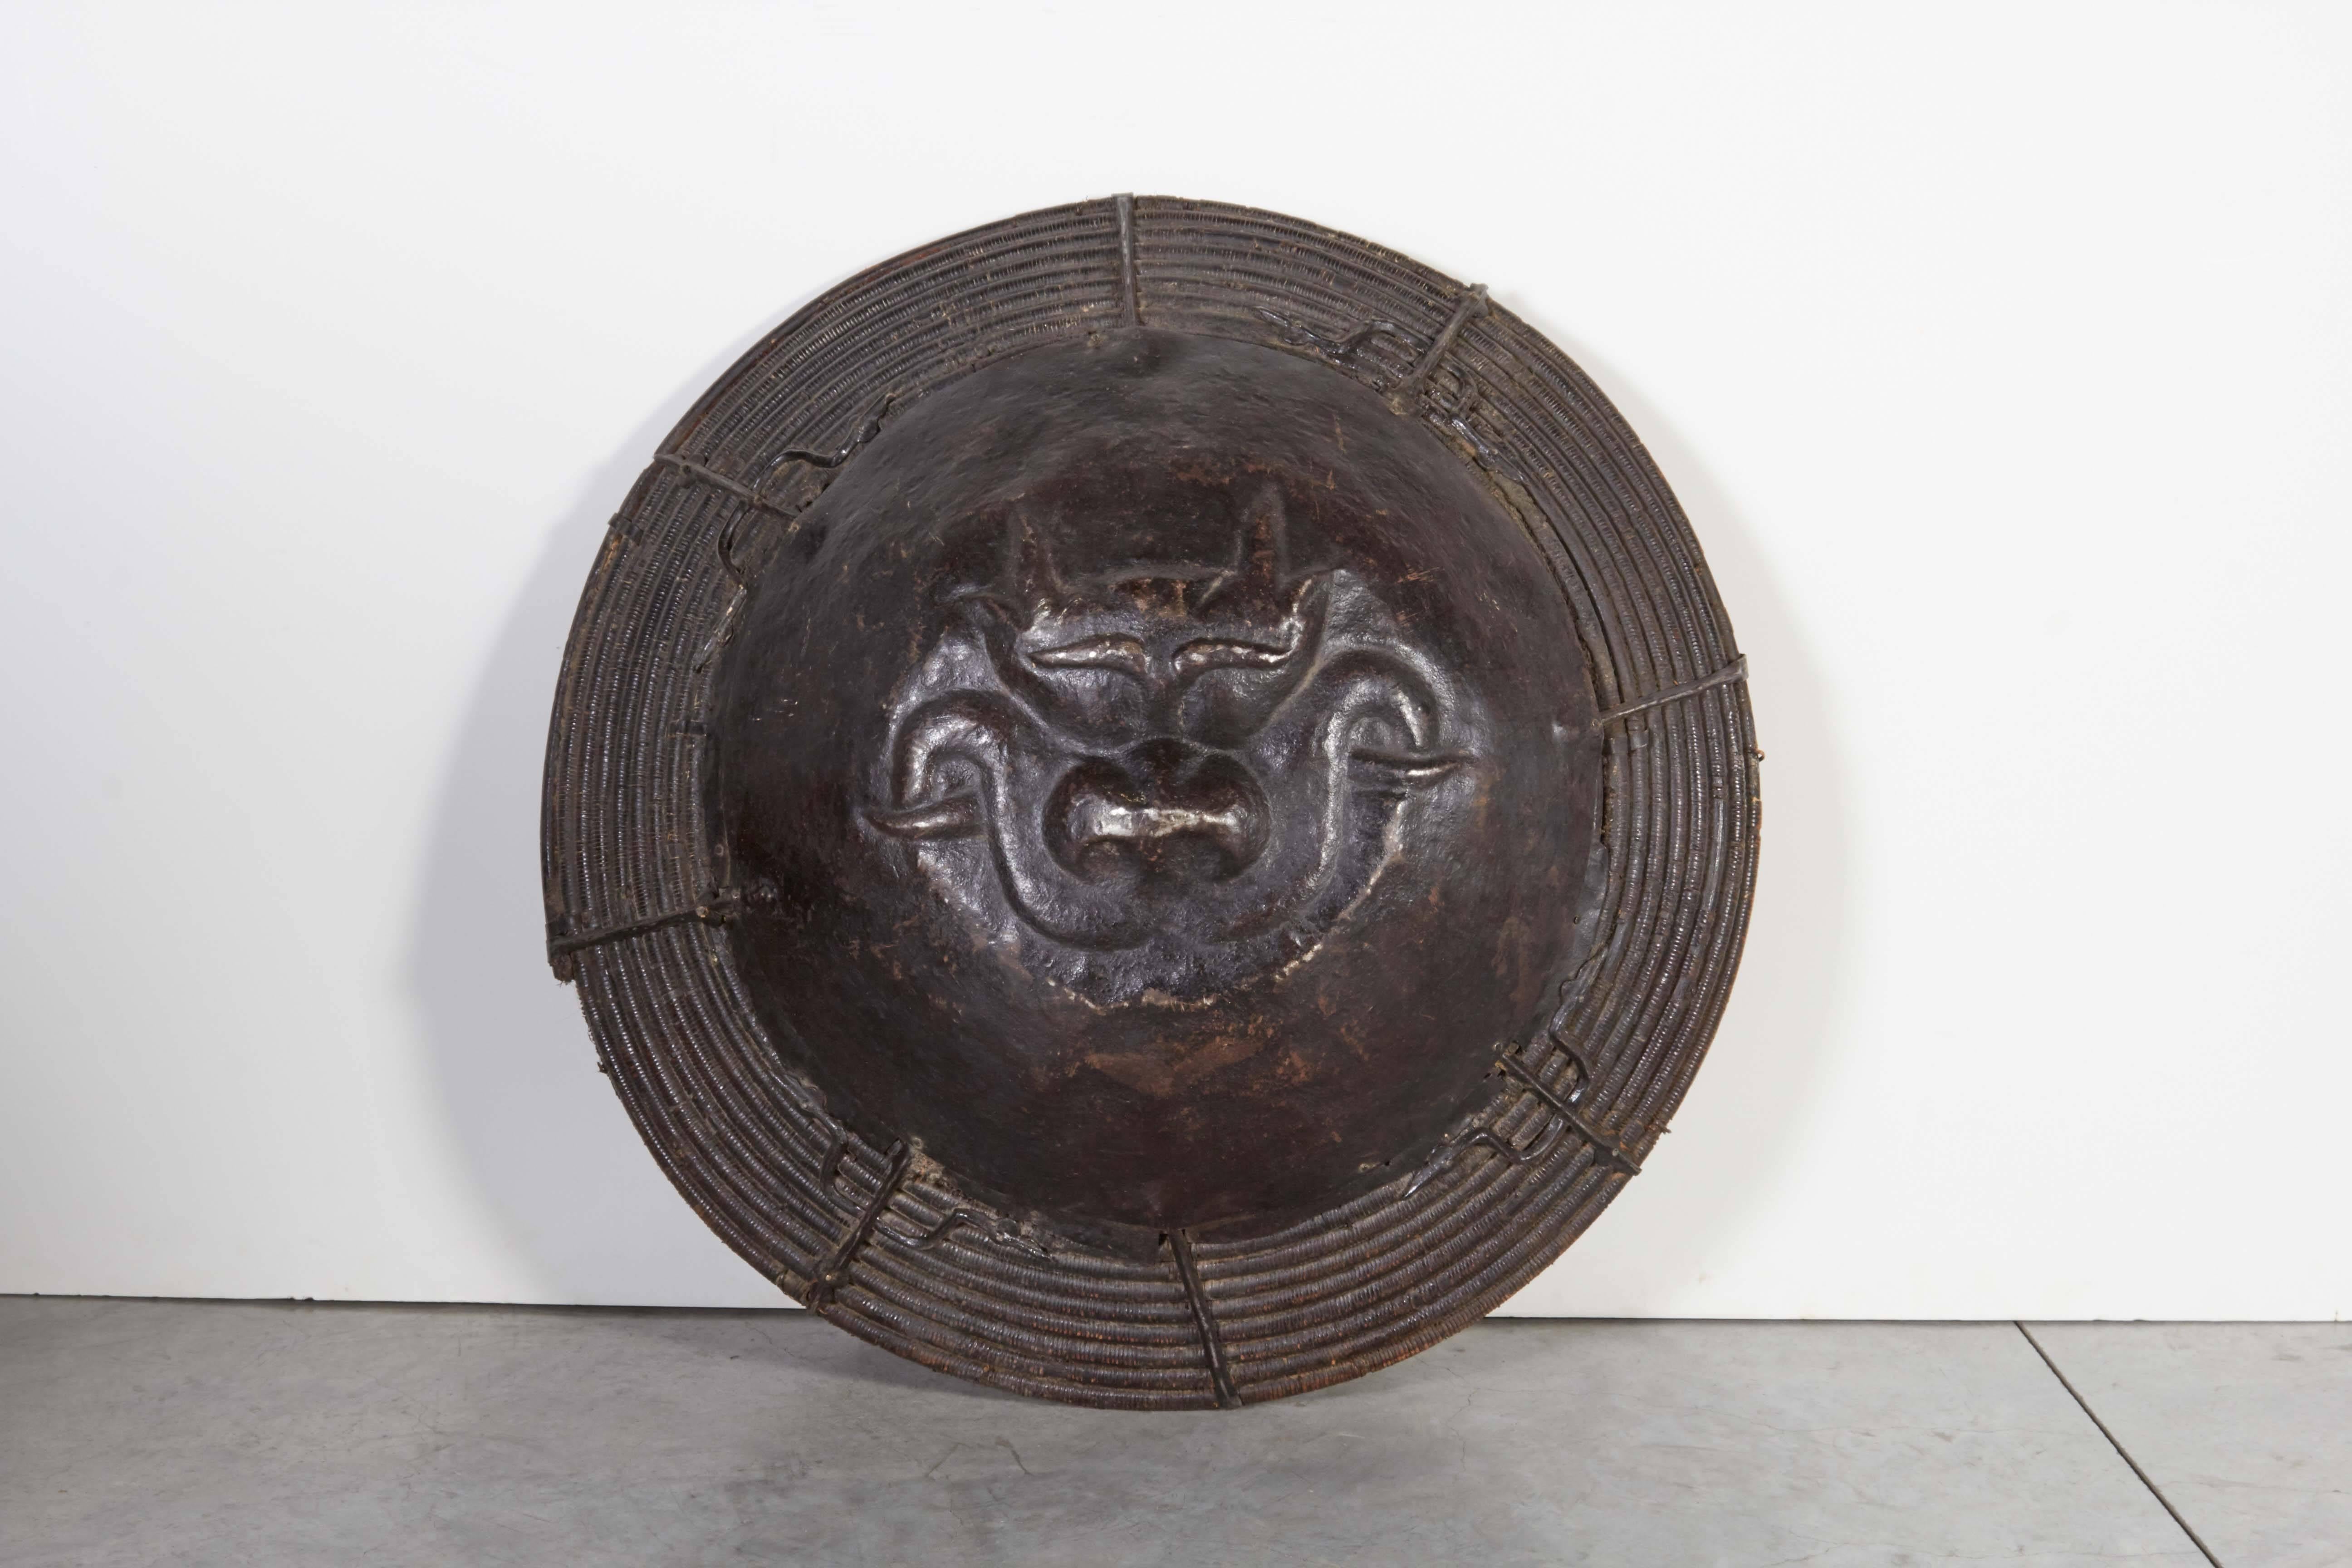 A large and rarely seen woven willow and iron antique Tibetan shield with central image of a very well defined and artfully wrought dragon face. A great piece of craftsmanship and a historical artifact. This piece displays extraordinary detail from